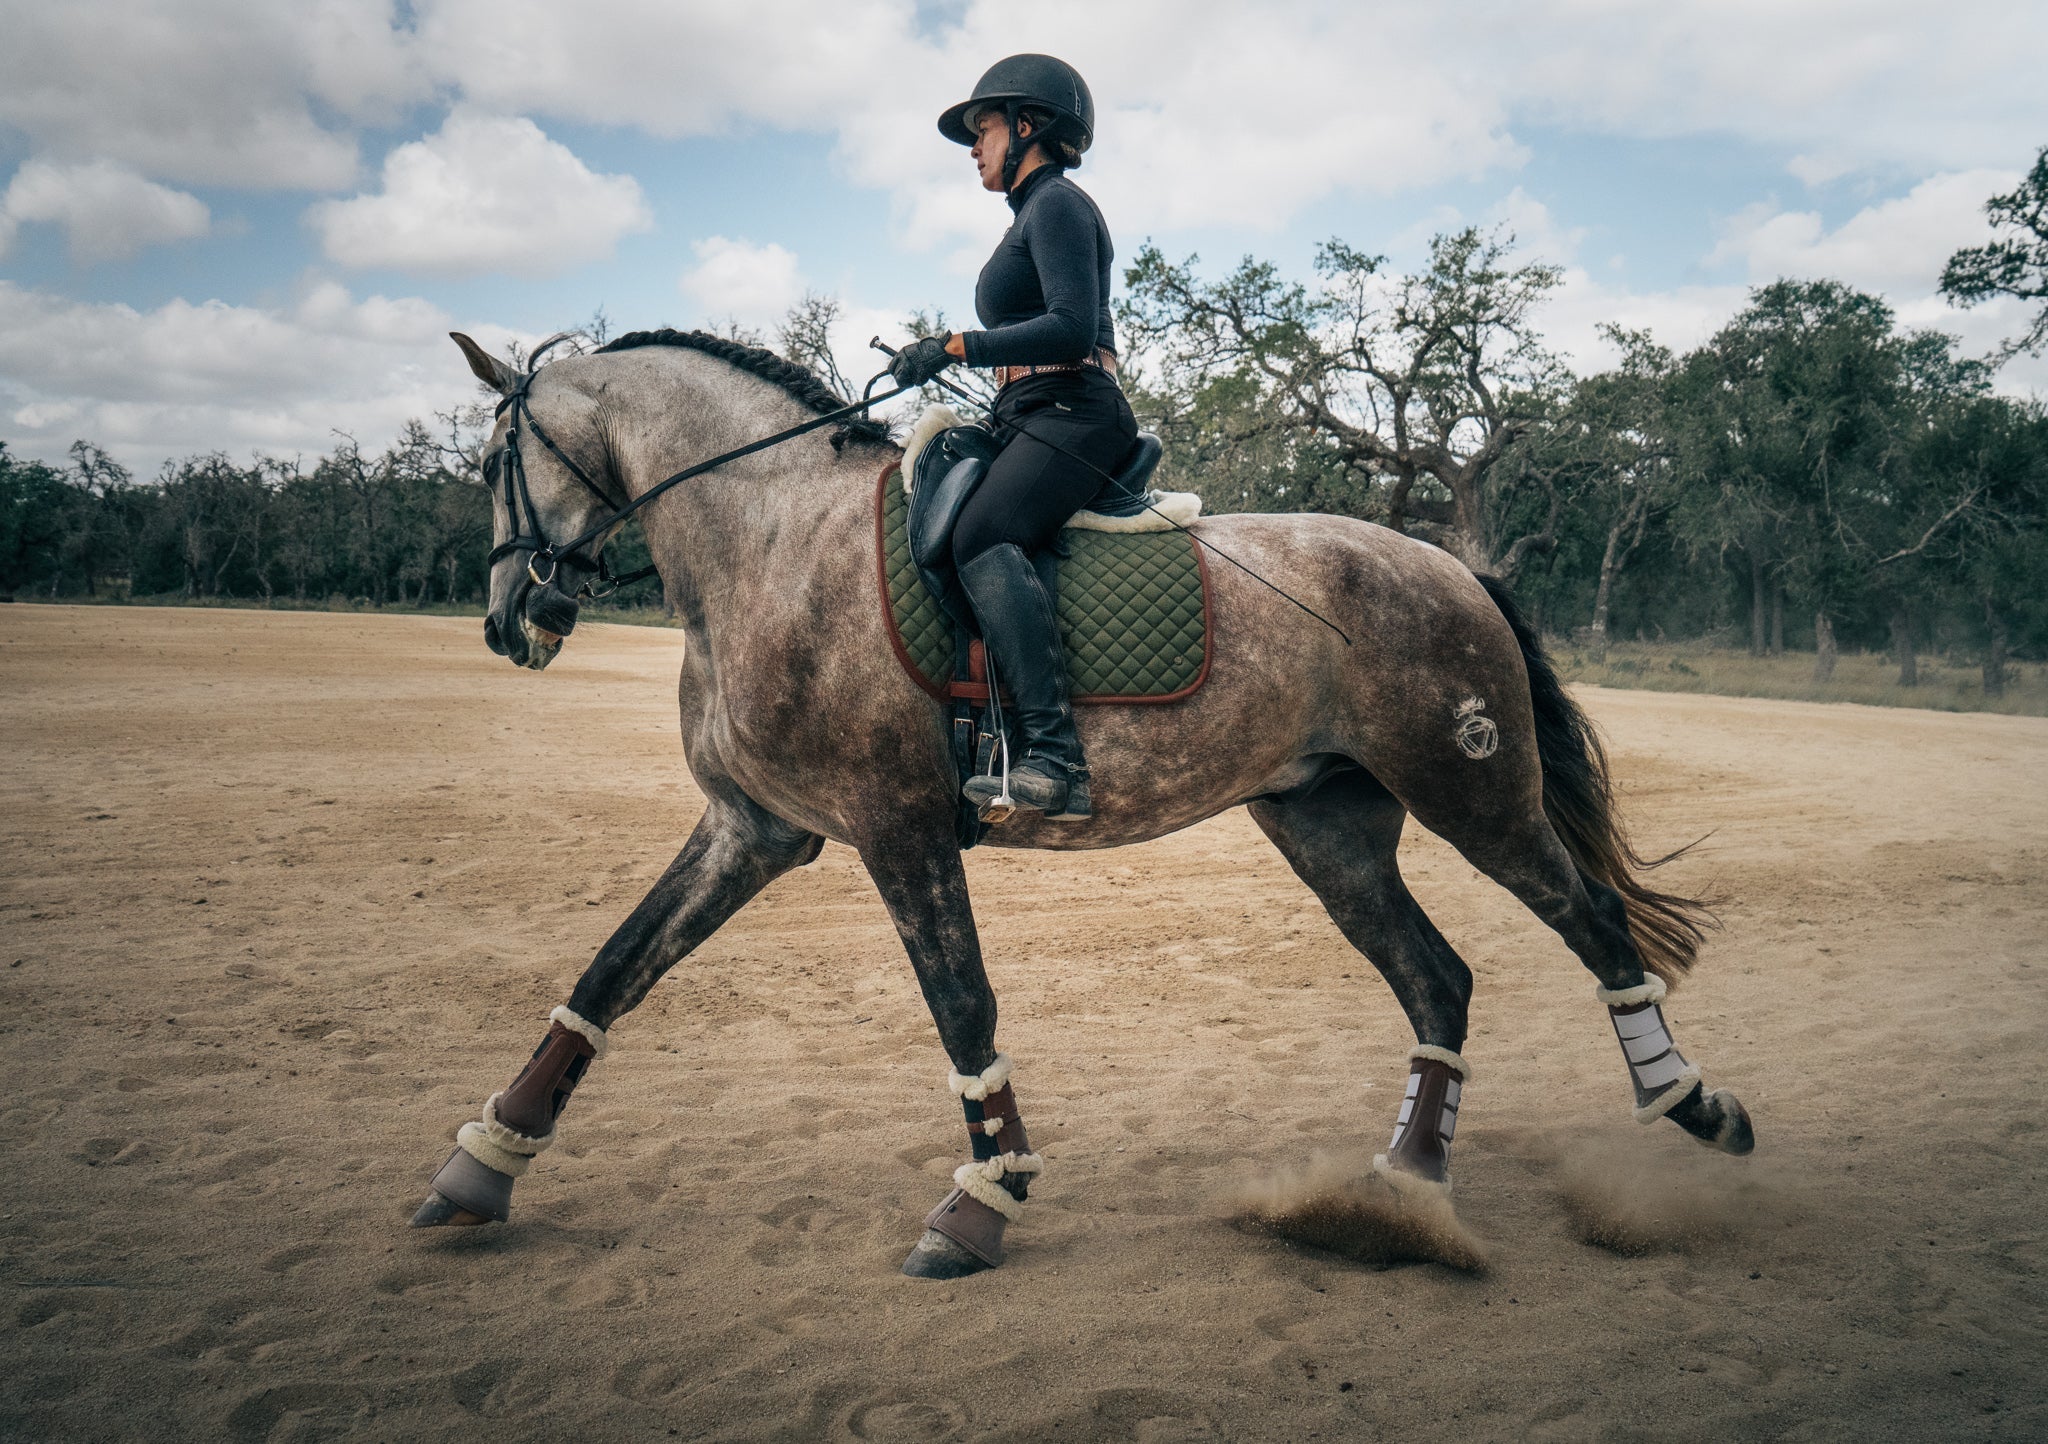 Sixteen Cypress Dressage Pad, Olive & Cognac - PREORDER - Equiluxe Tack